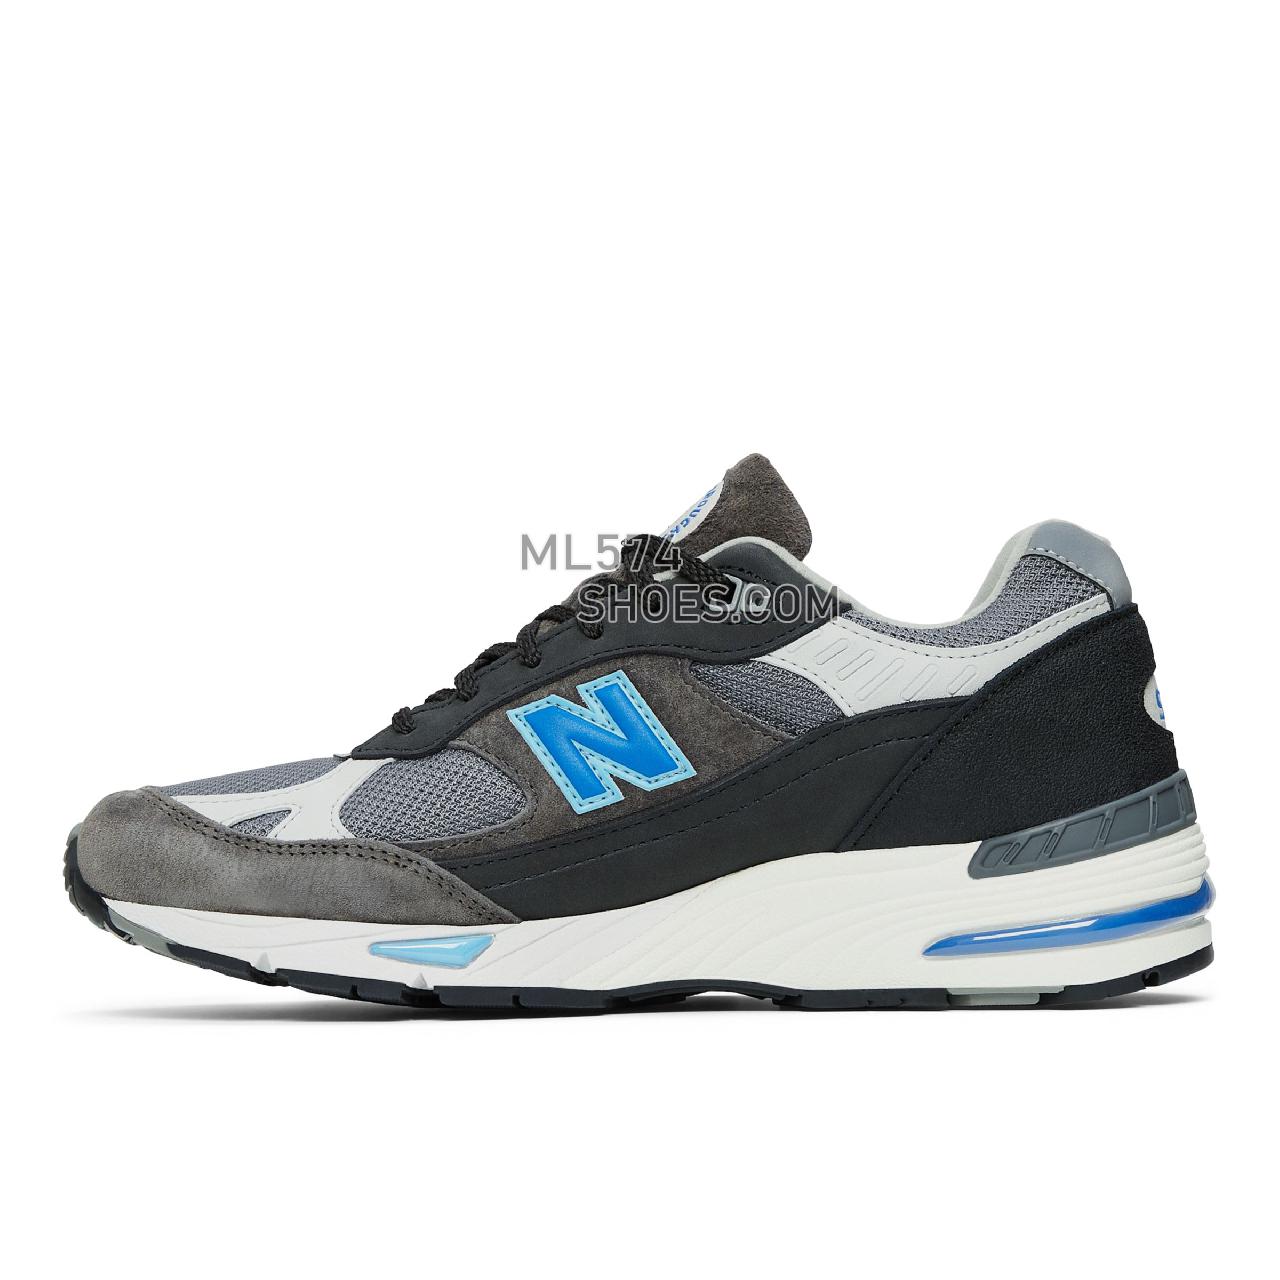 New Balance MADE in UK 991 - Men's Made in USA And UK Sneakers - Grey with black and imperial blue - M991LM